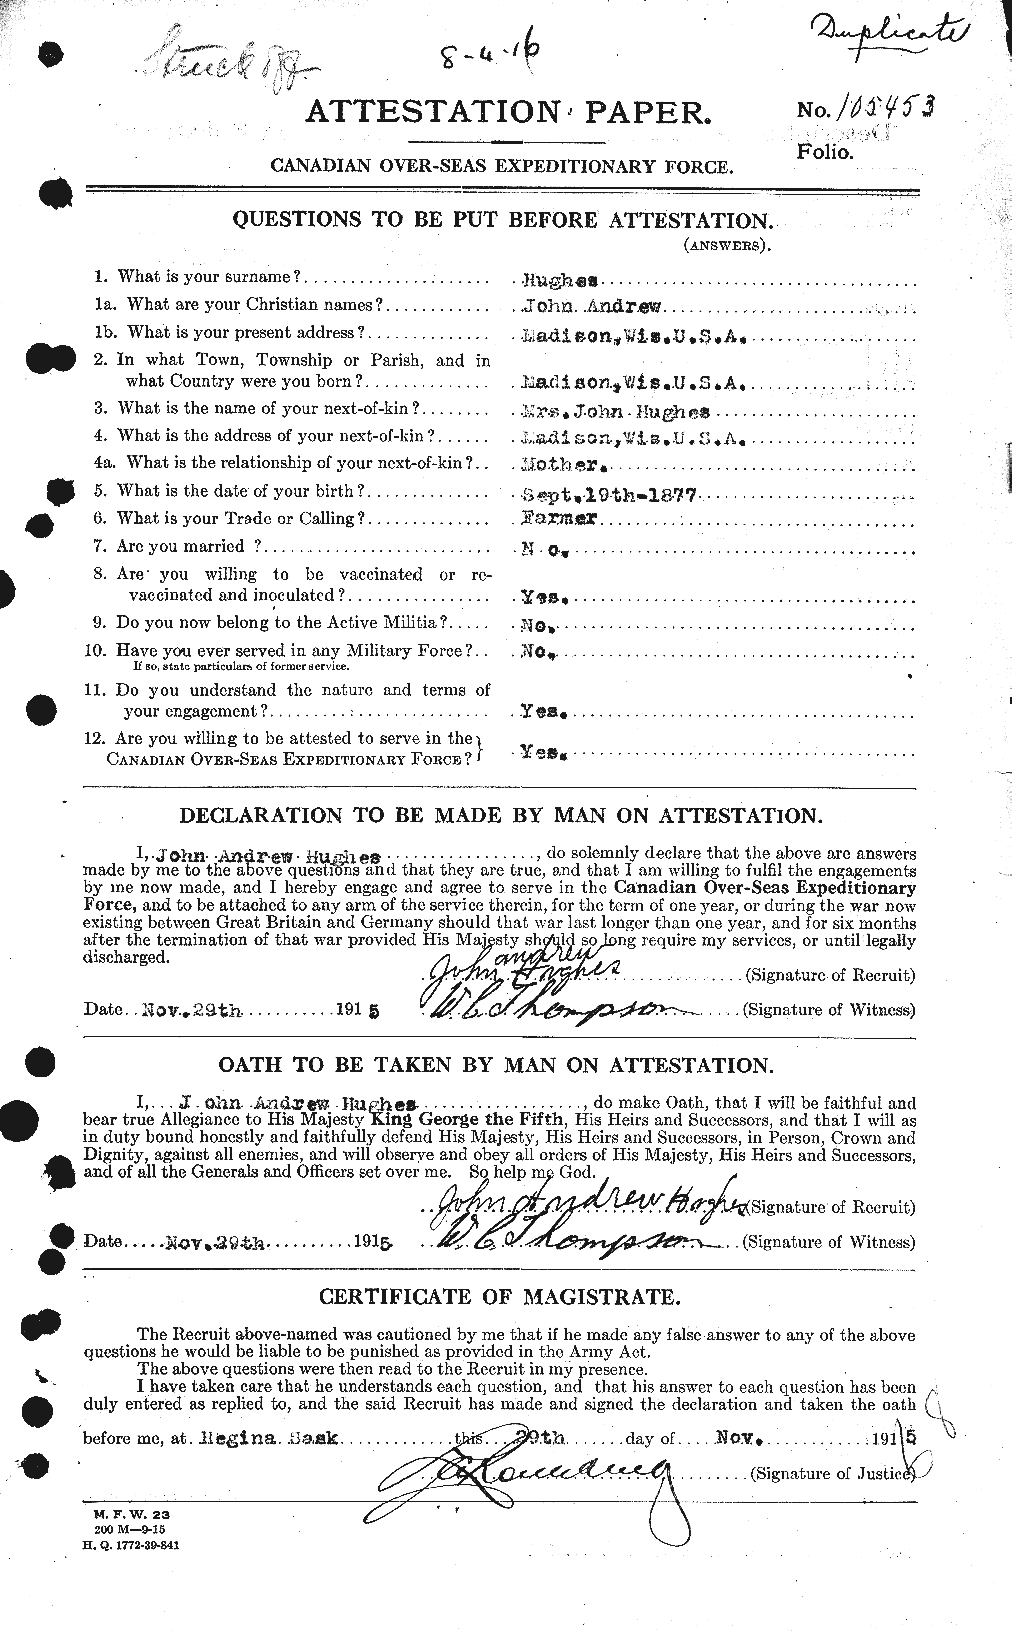 Personnel Records of the First World War - CEF 404007a